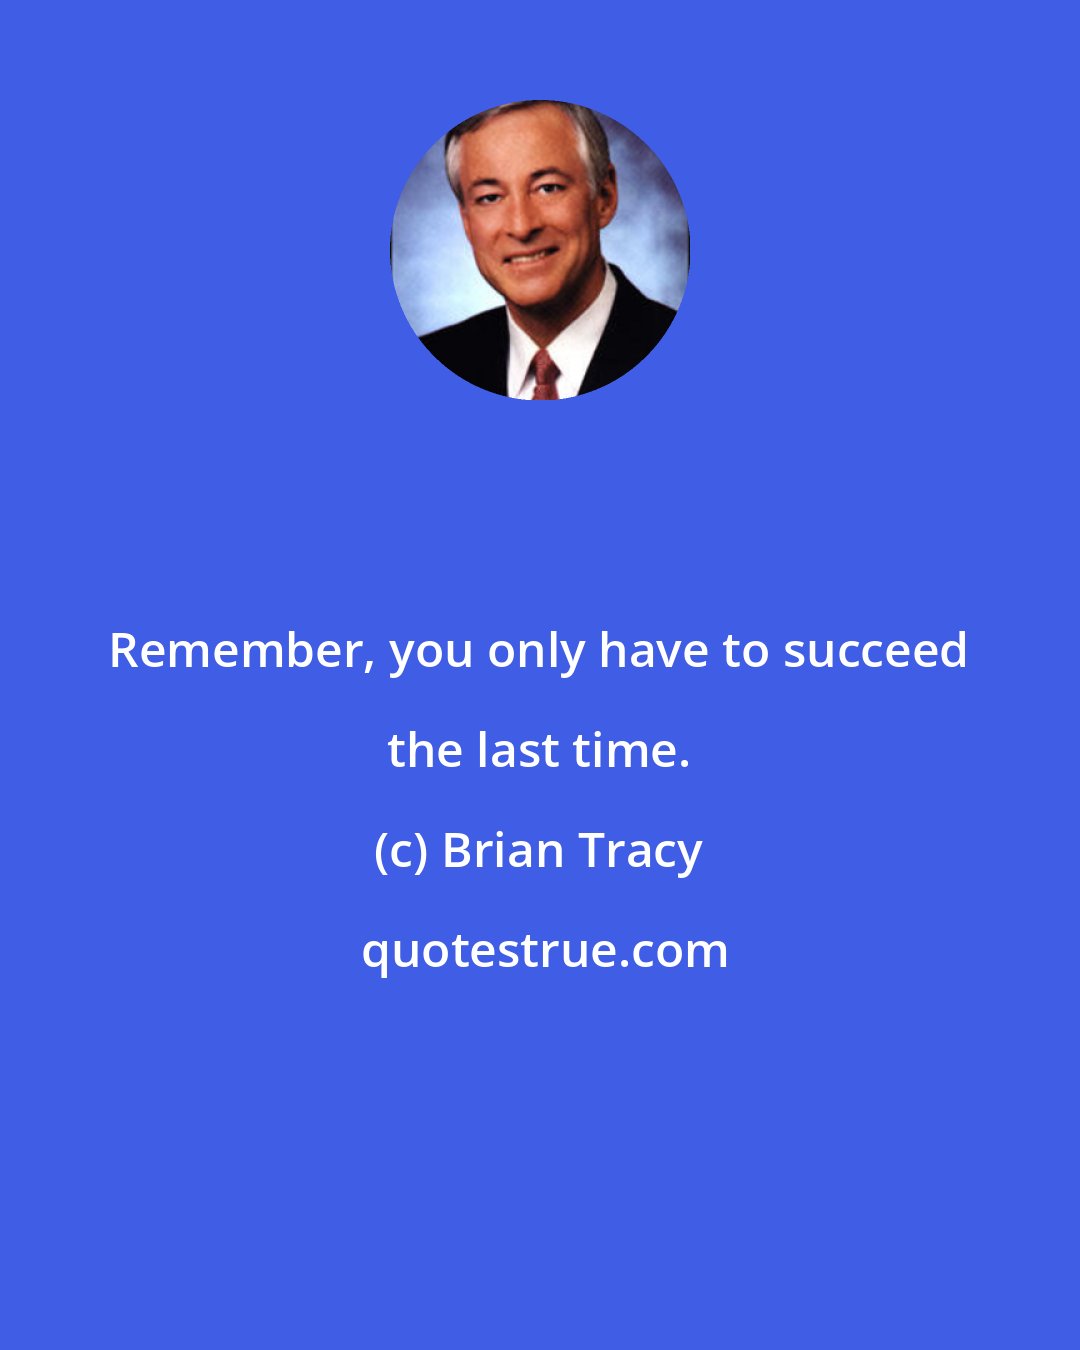 Brian Tracy: Remember, you only have to succeed the last time.